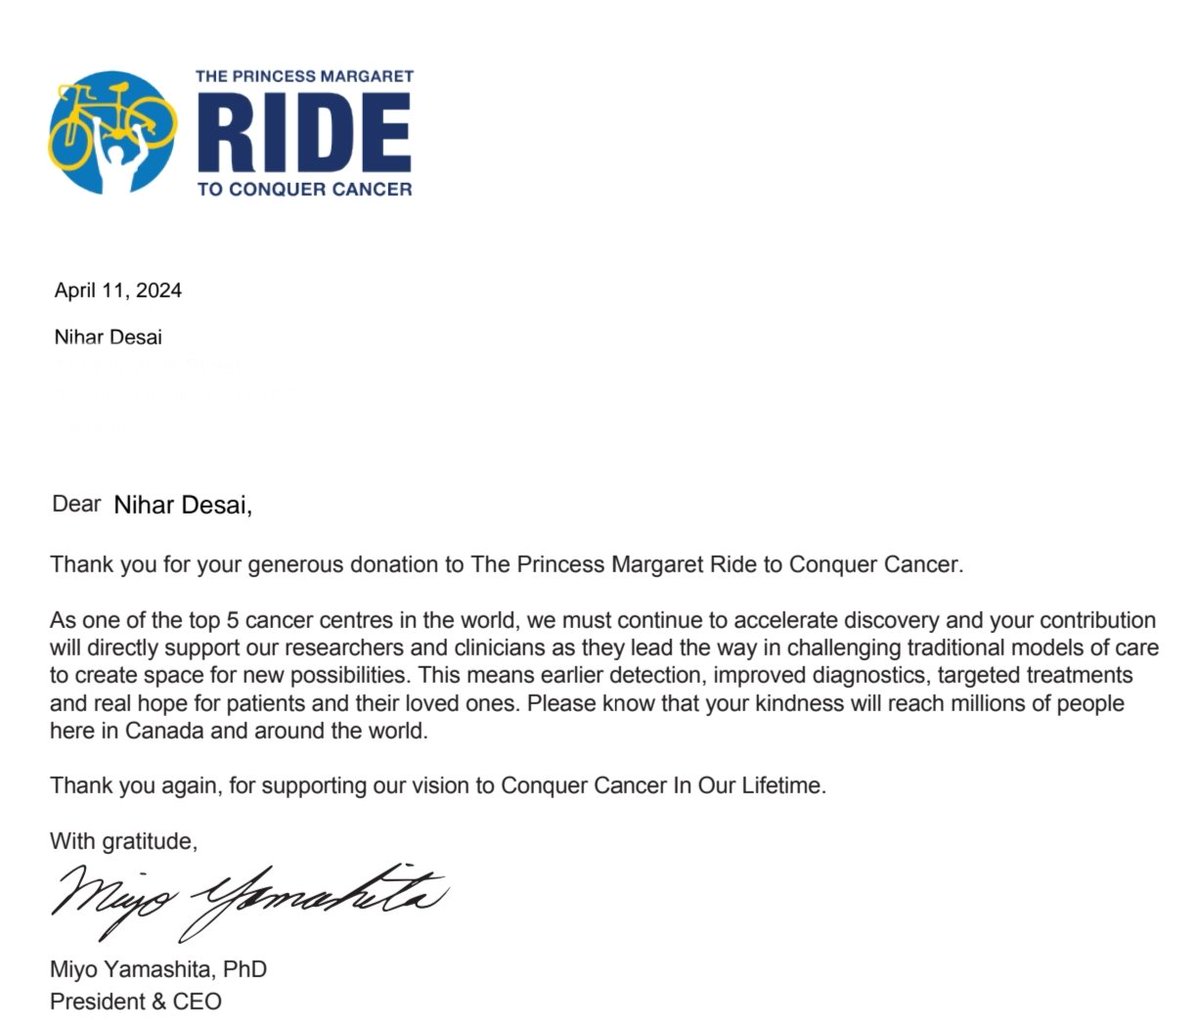 I have done my bit 🙏🏼 Please consider donating to the Princess Margaret Ride to Conquer Cancer 👇🏻 My friend and mentor, @IvanPasic is going to 🚴🏼 for this amazing cause. Help him raise💲to advance cancer care 💪🏻 supportthepmcf.ca/ui/Ride24/p/8a… #MedTwitter